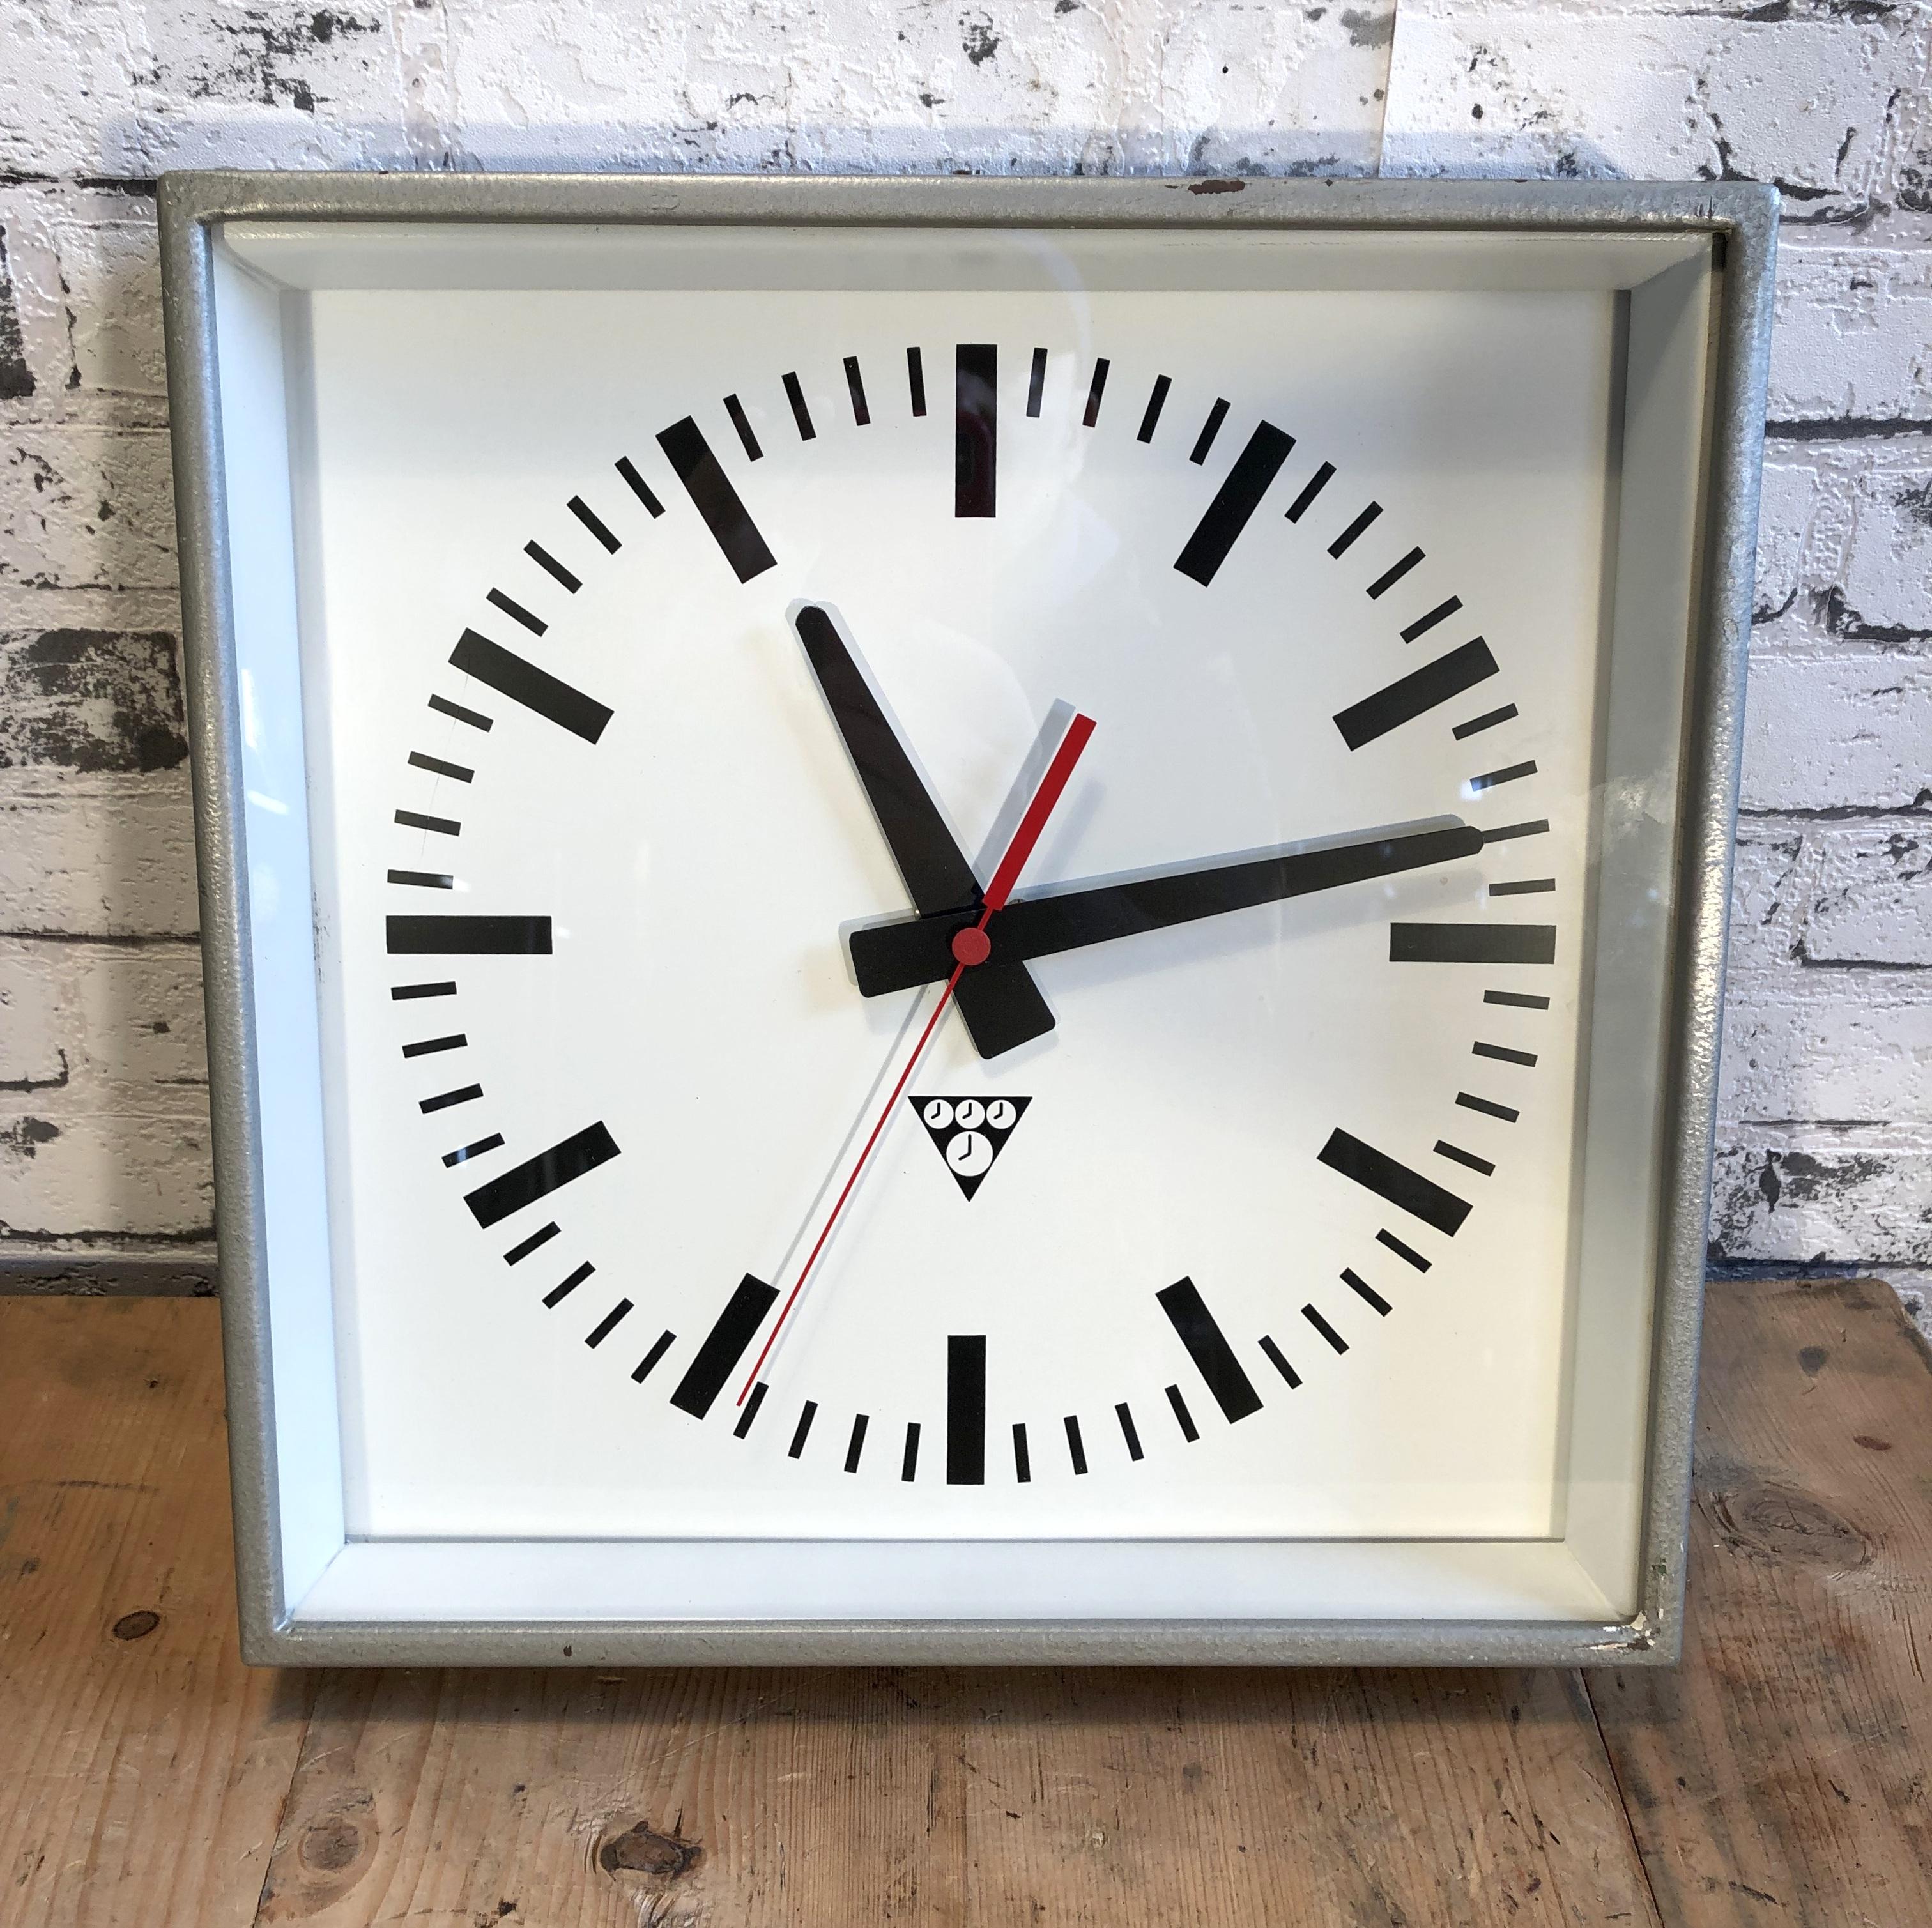 Clock made by Pragotron in former Czechoslovakia during the 1970s.Was used in factories, schools & railway stations. Grey metal hammer paint body, aluminium dial and hands, clear glass cover.
This item has been converted into a battery-powered